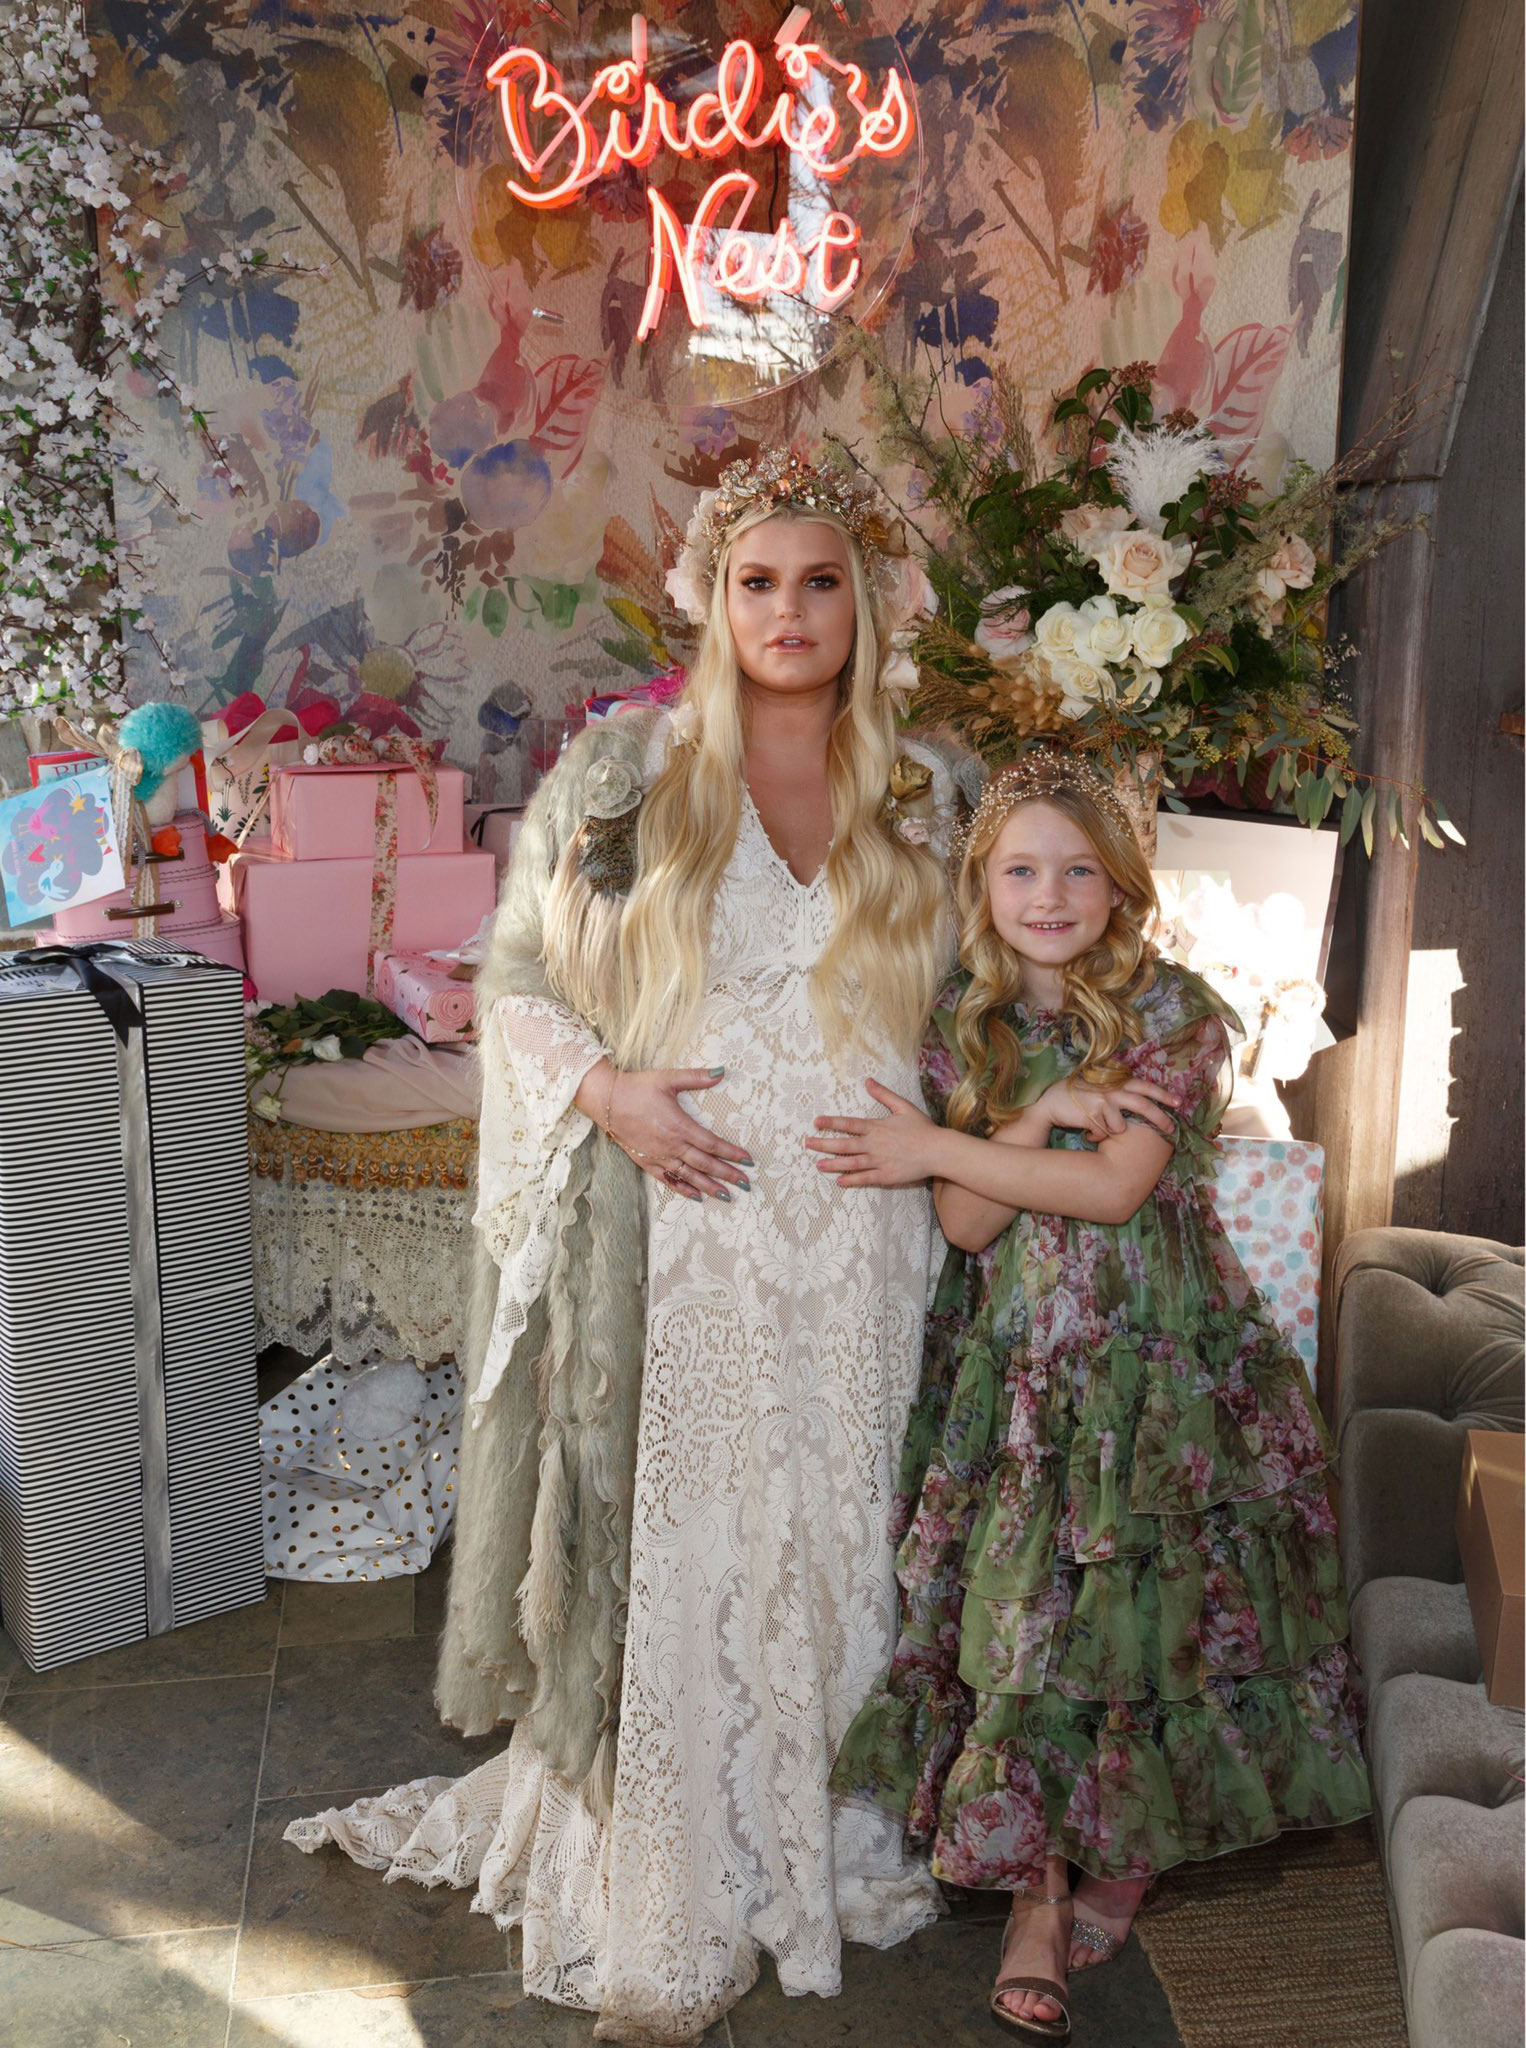 Jessica Simpson Sells Baby Photos for $800,000, Launches Maternity